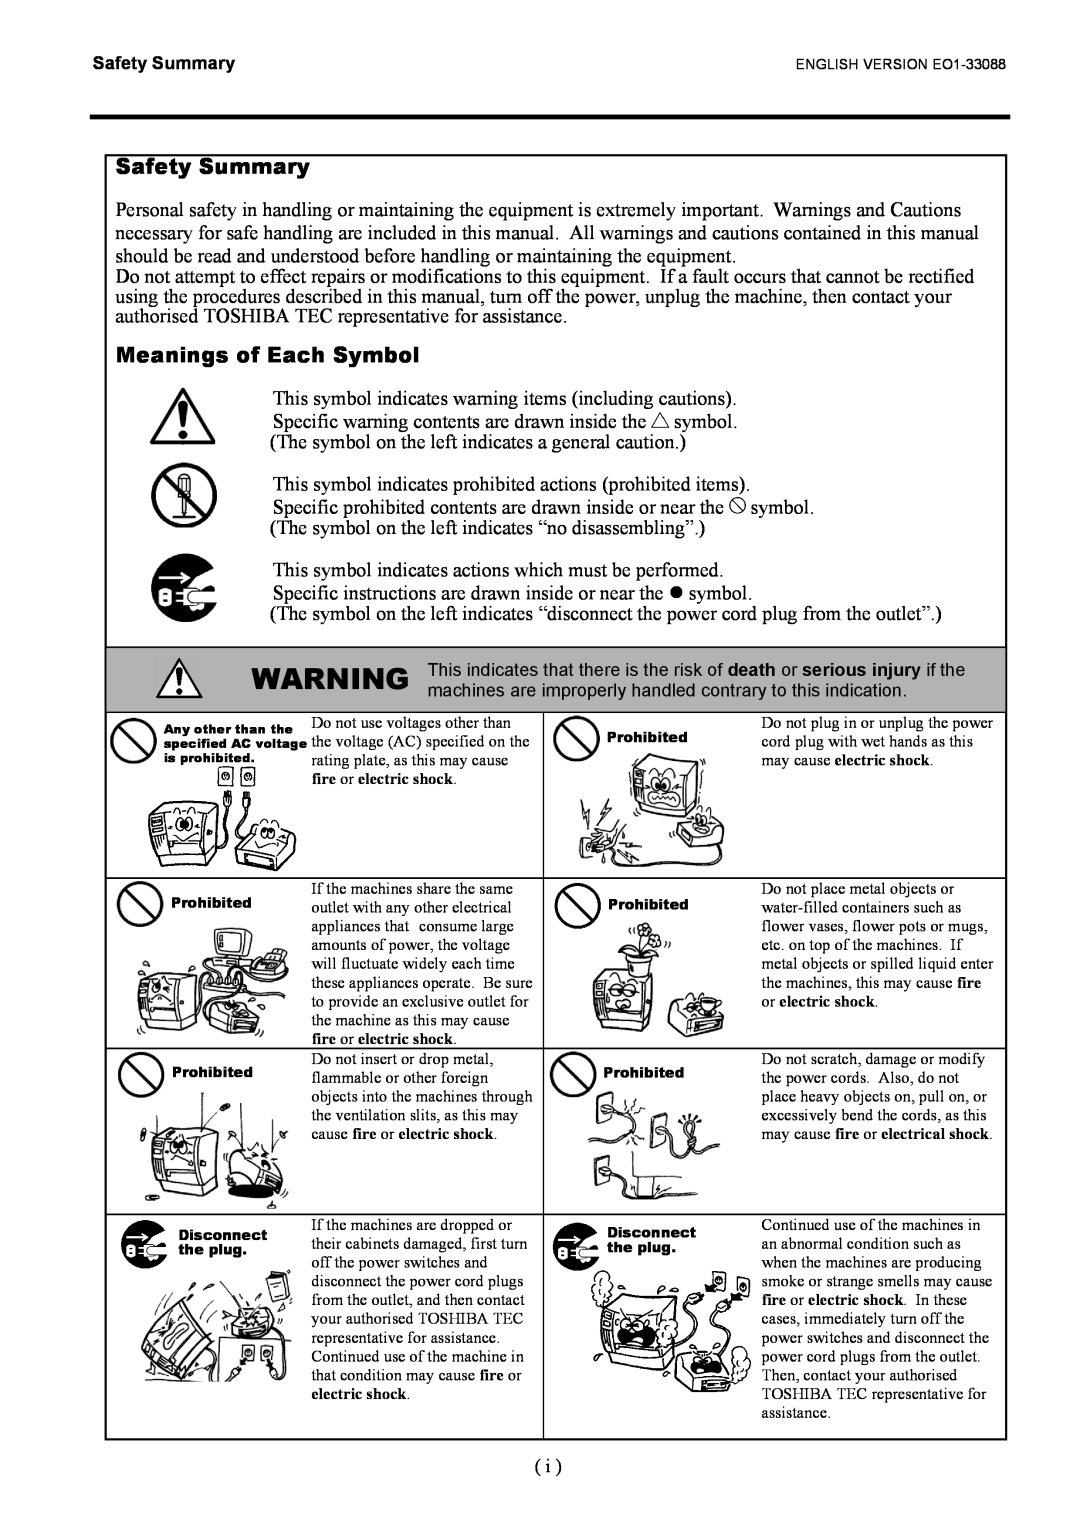 Toshiba B-EV4D SERIES, EO1-33088 owner manual Safety Summary, Meanings of Each Symbol 